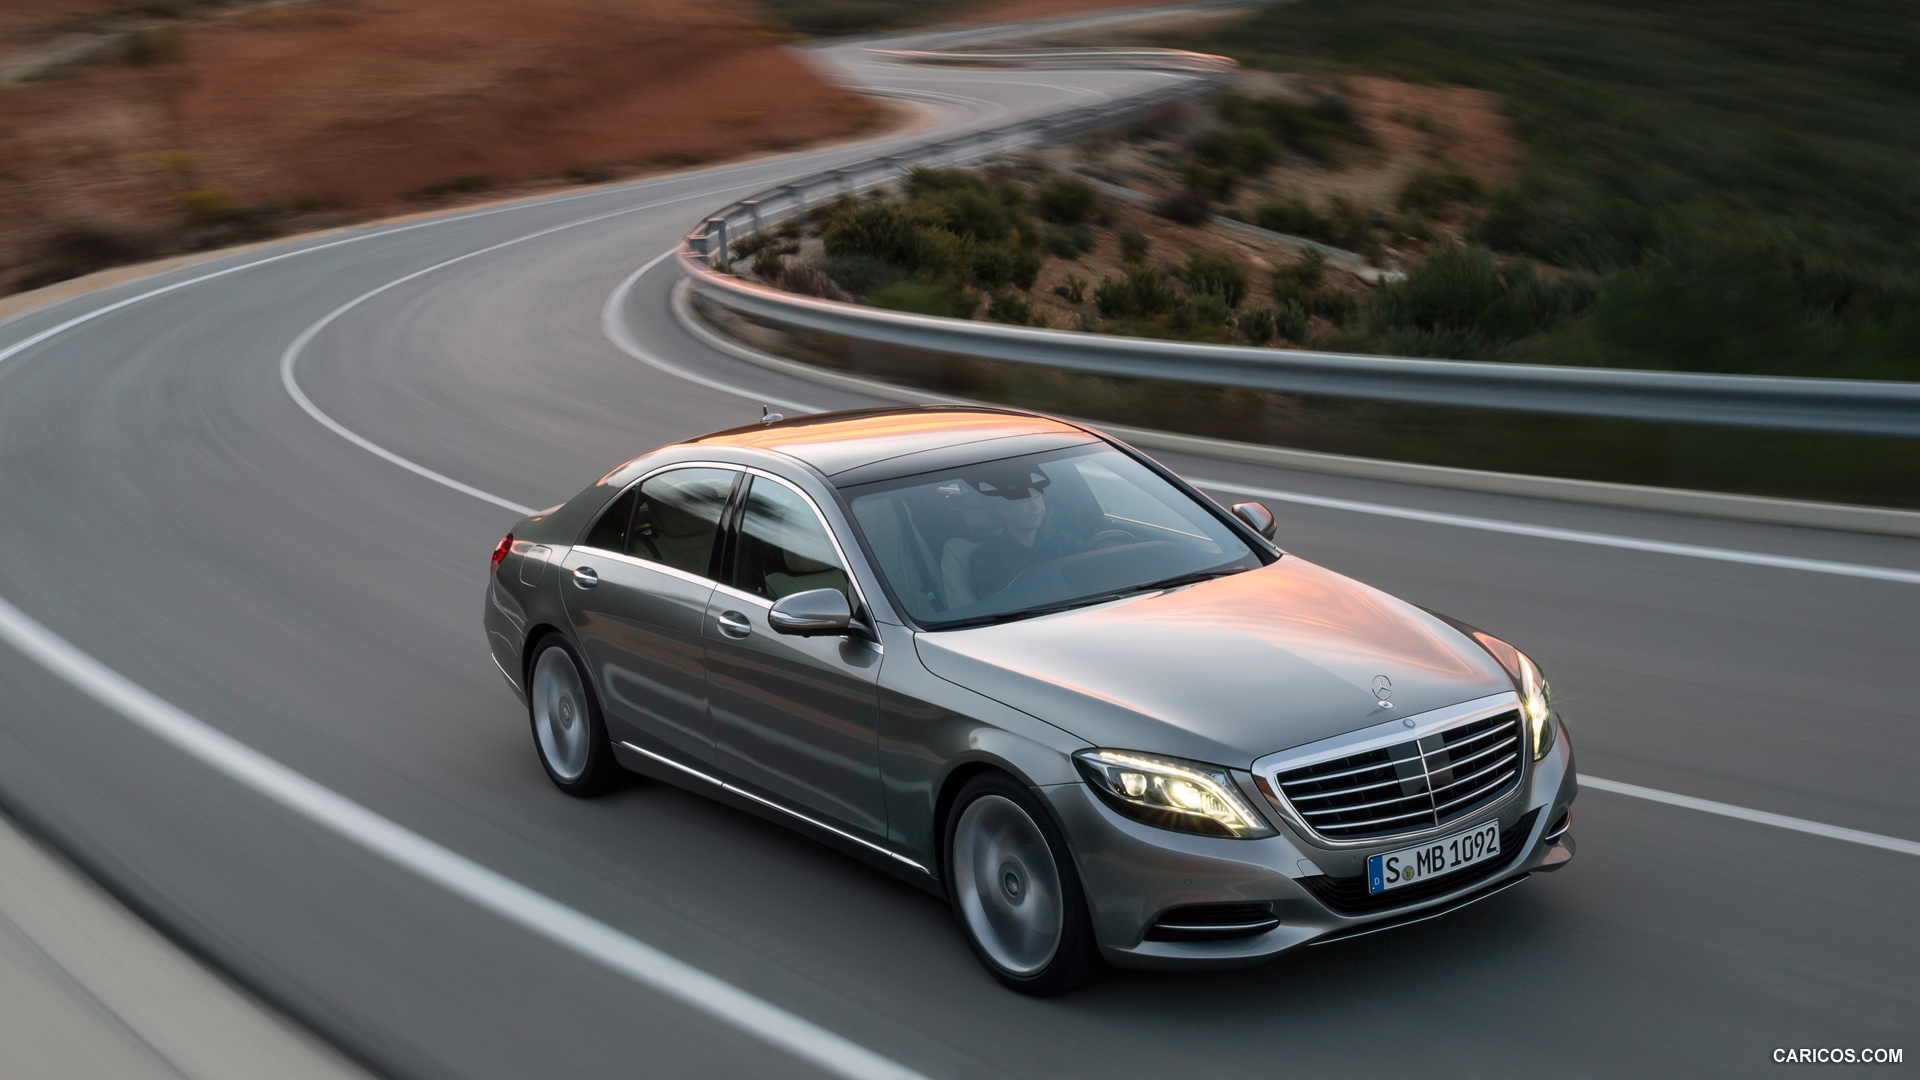 2014 Mercedes-Benz S-Class S400 HYBRID - Front, #15 of 138